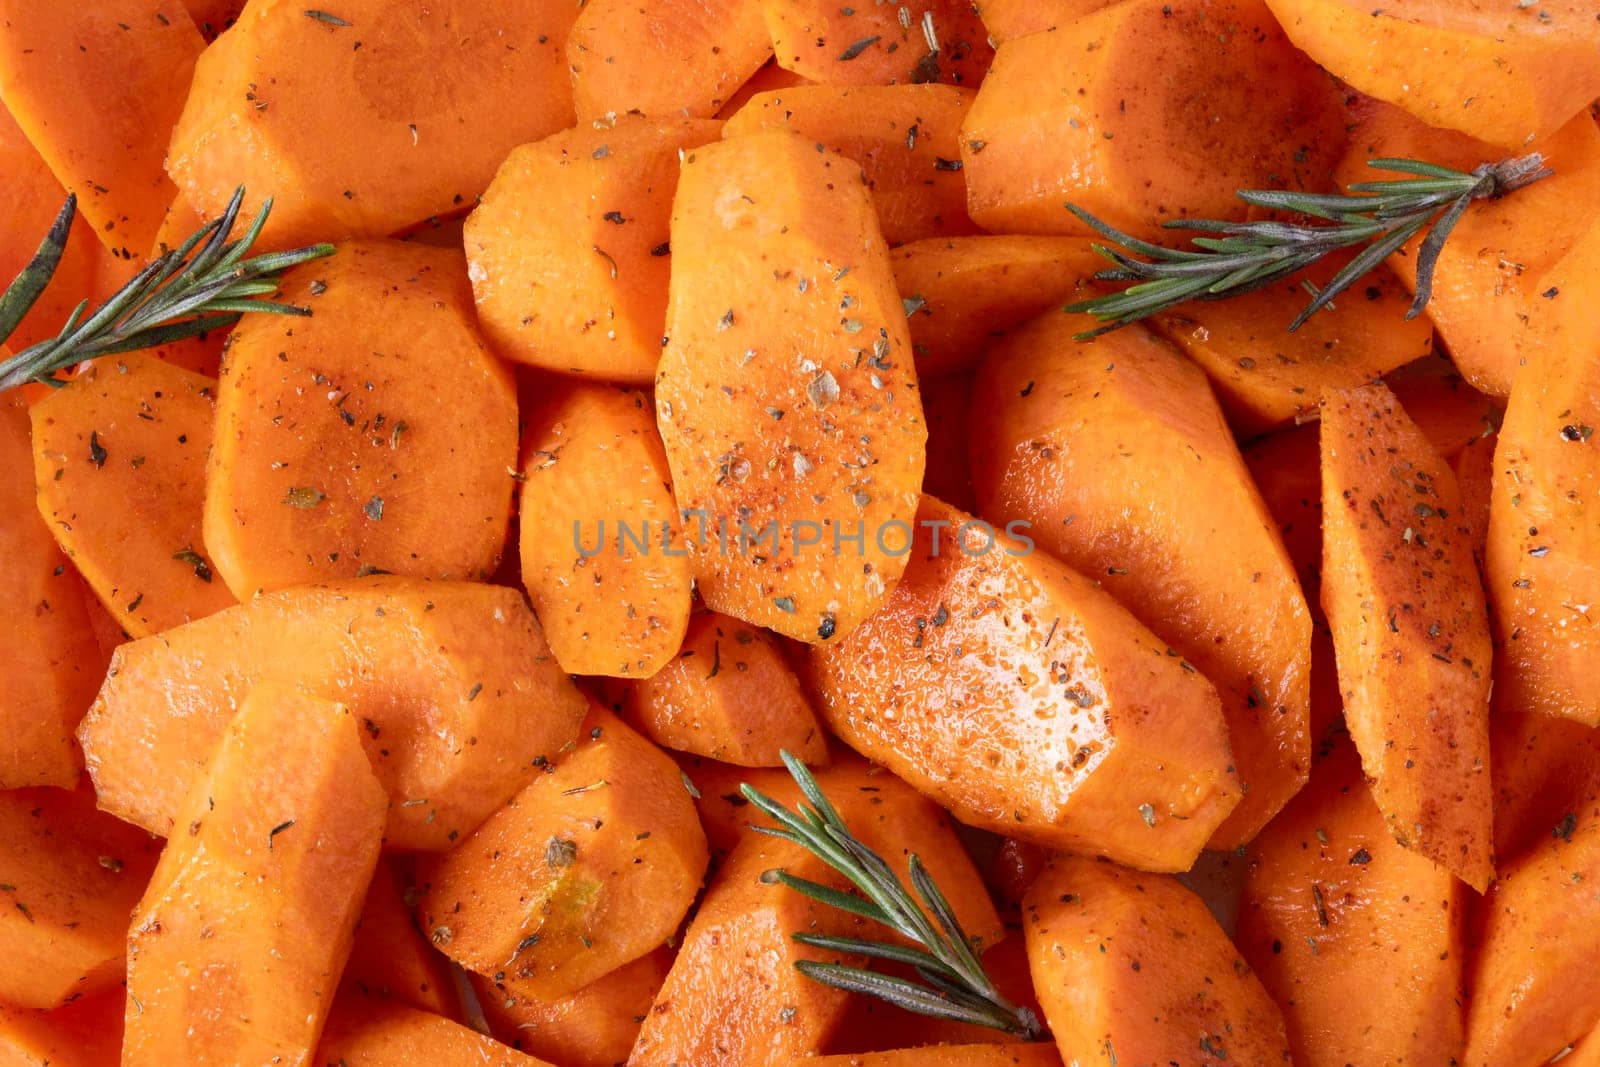 Carrots cut into pieces, seasoned with spices and olive oil, lie on baking tray. by OlgaGubskaya